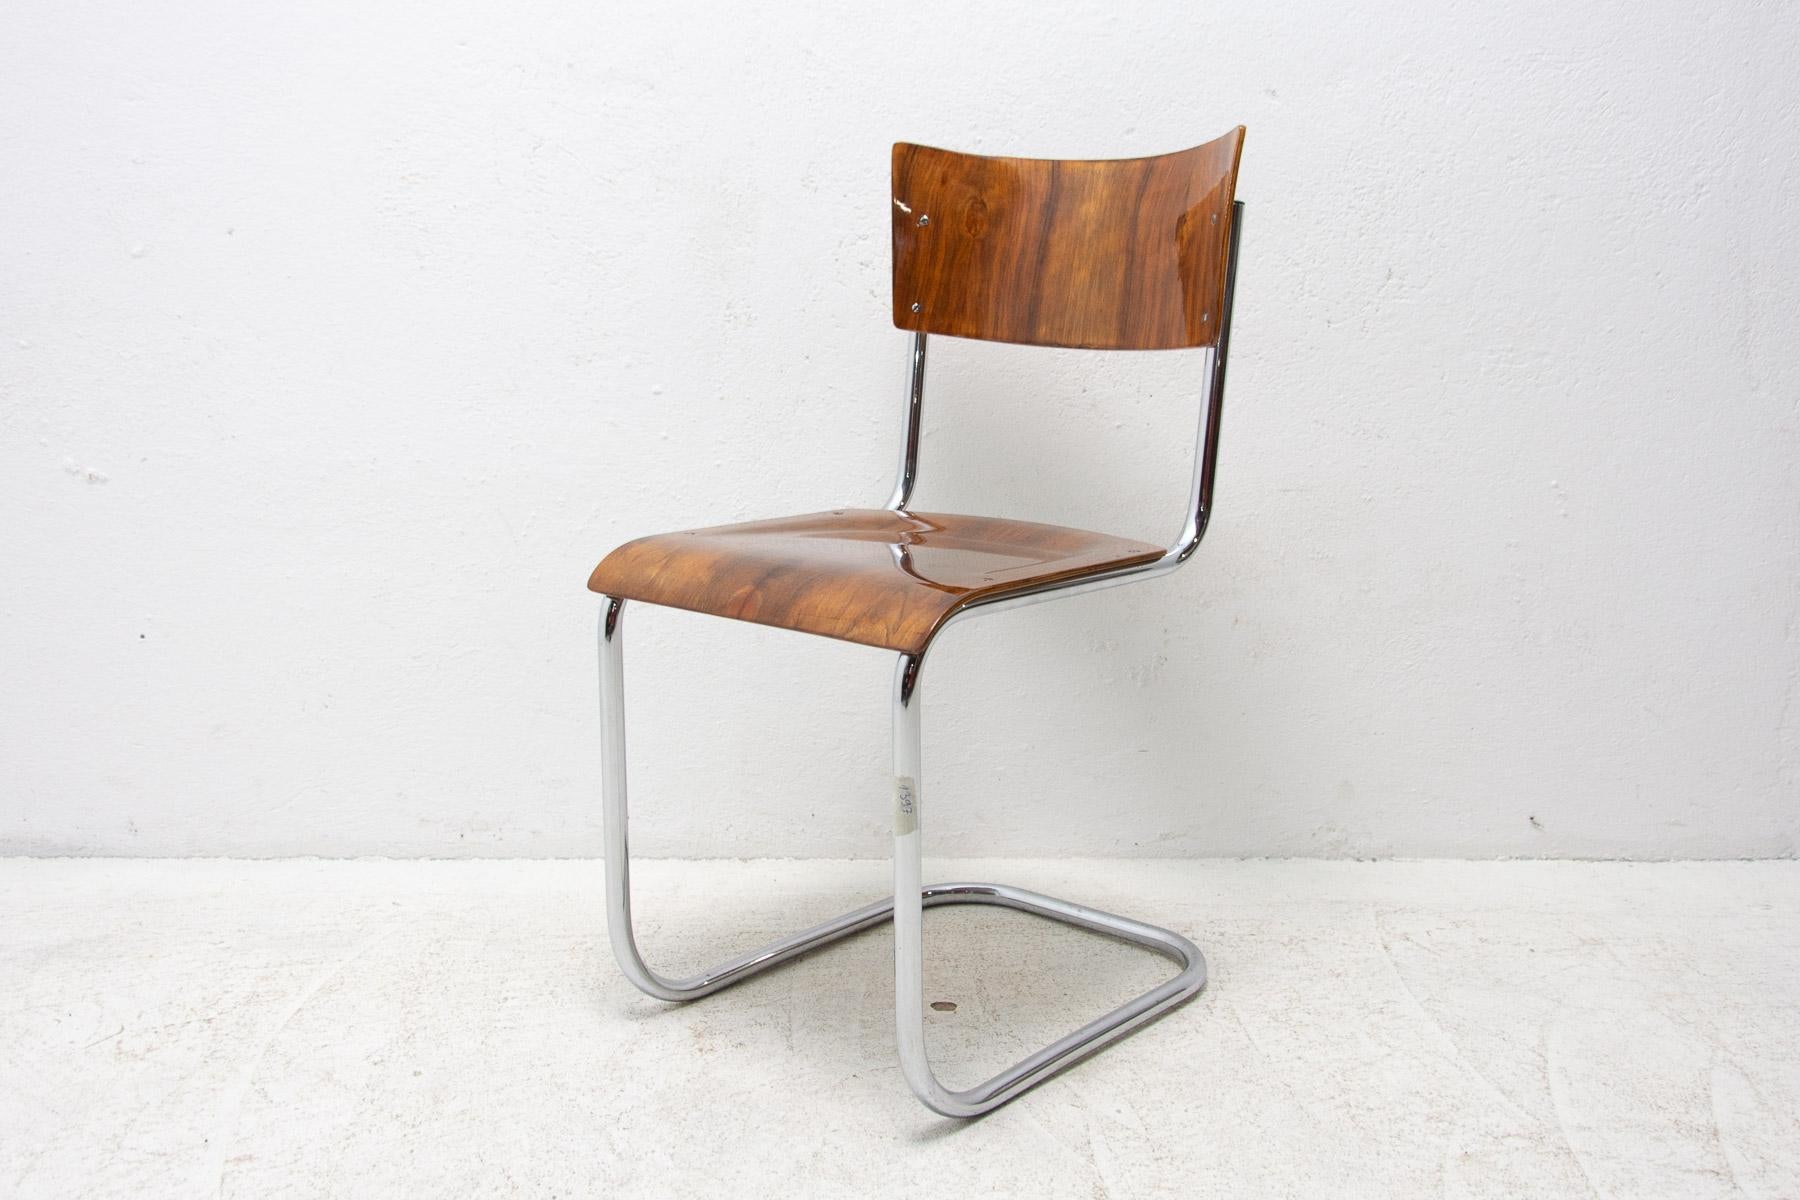 This chair is one of the most famous and was designed in the 1930´s by Mart Stam and made in the former Czechoslovakia in the 1950´s. The chair has frames made of tubular chrome-plated steel, plywood seats and backrests that are varnished with